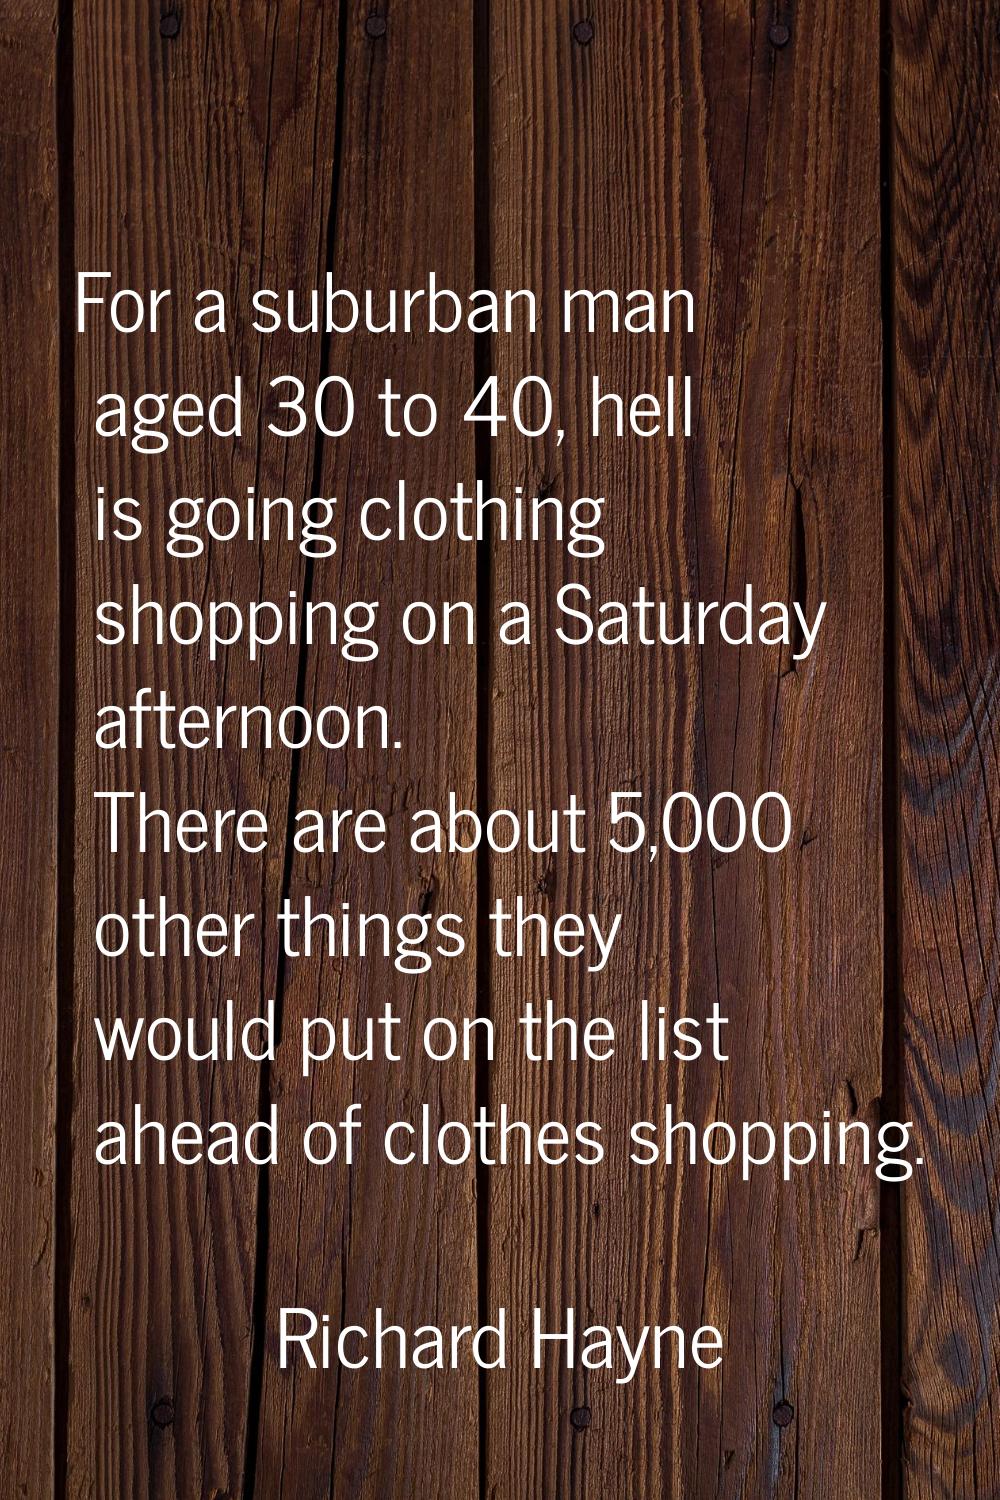 For a suburban man aged 30 to 40, hell is going clothing shopping on a Saturday afternoon. There ar